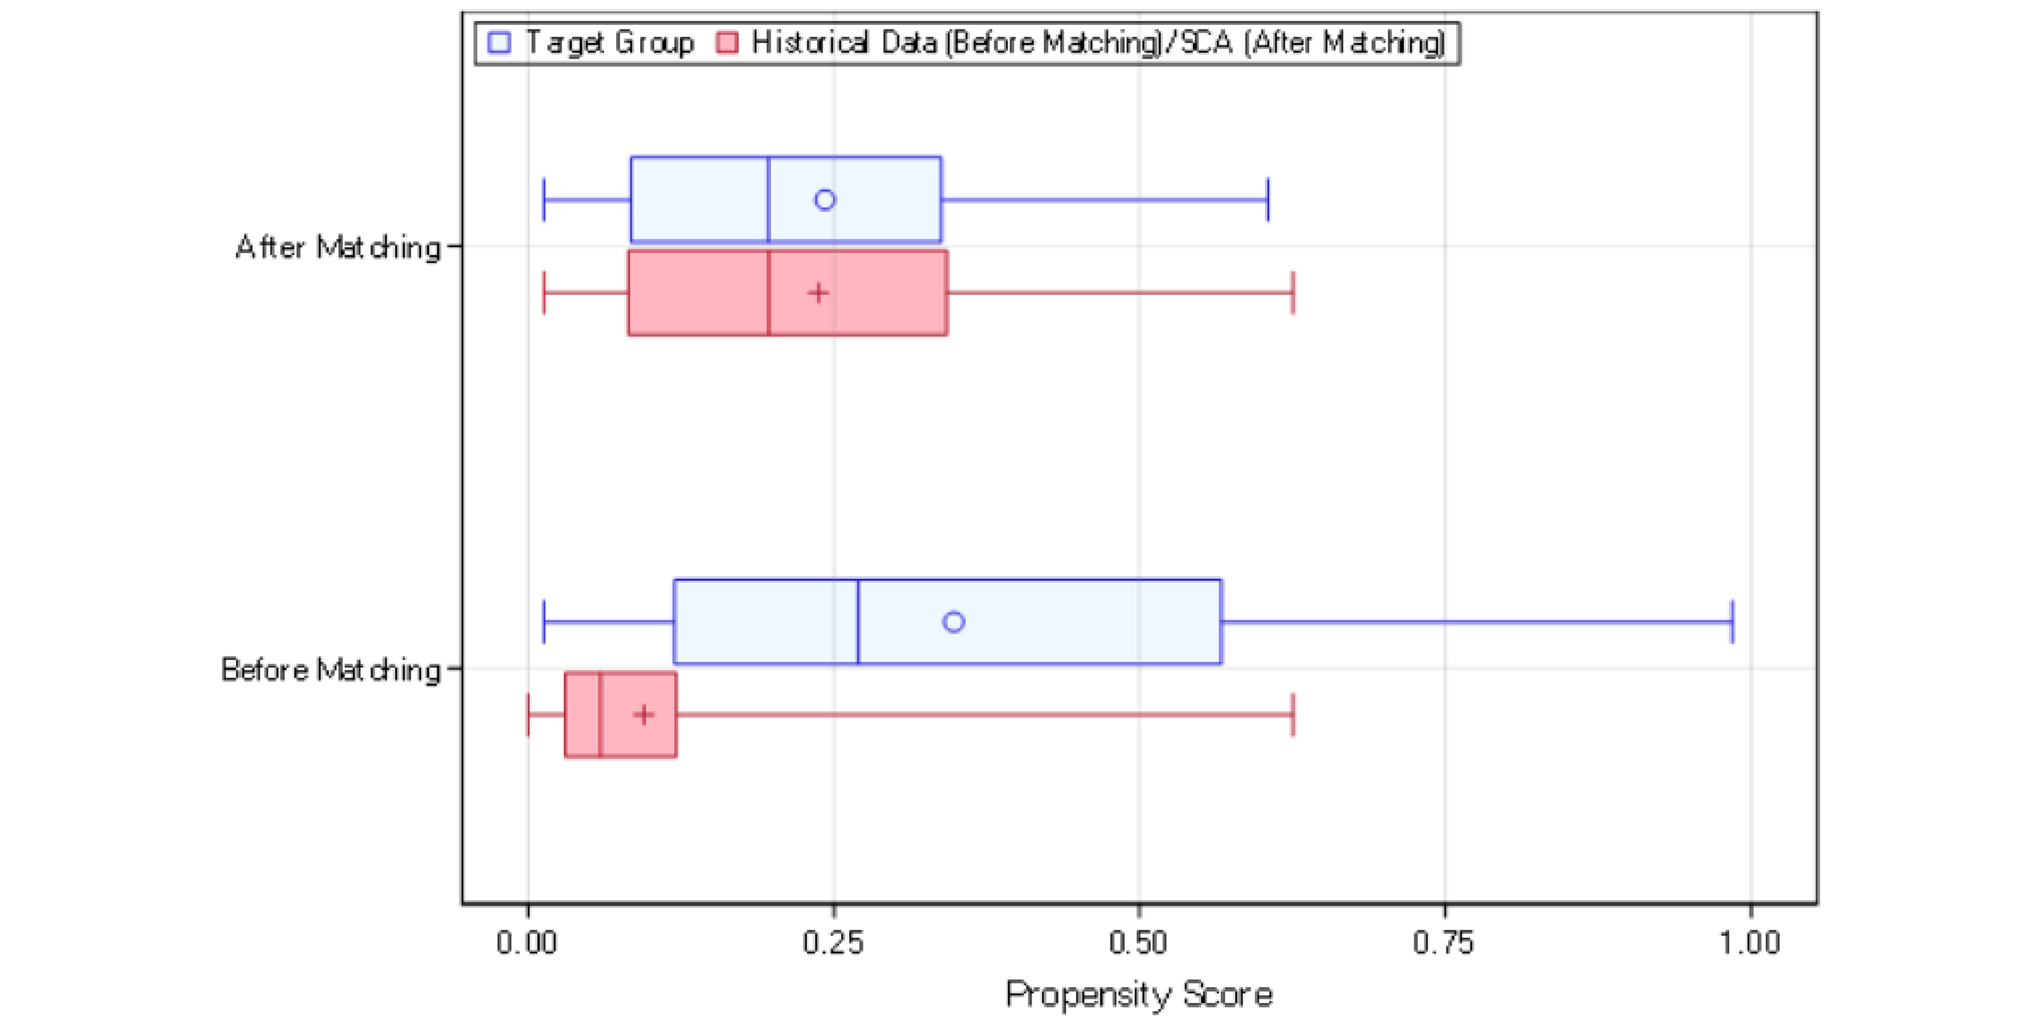 The propensity score distributions of patients in the SCHOLAR-3 study, before and after matching, are presented. Based on the propensity score distributions, the baseline characteristics (i.e., selected prognostic factors) between the patients in the target group (patients in the ZUMA-3 study mITT population who were naive to blinatumomab and inotuzumab) and the historical data (data pool for synthetic control arm 1 [SCA-1]) were observed to be dissimilar before matching. After matching, the characteristics between the patients in the target group and the SCA-1 were observed to be similar.